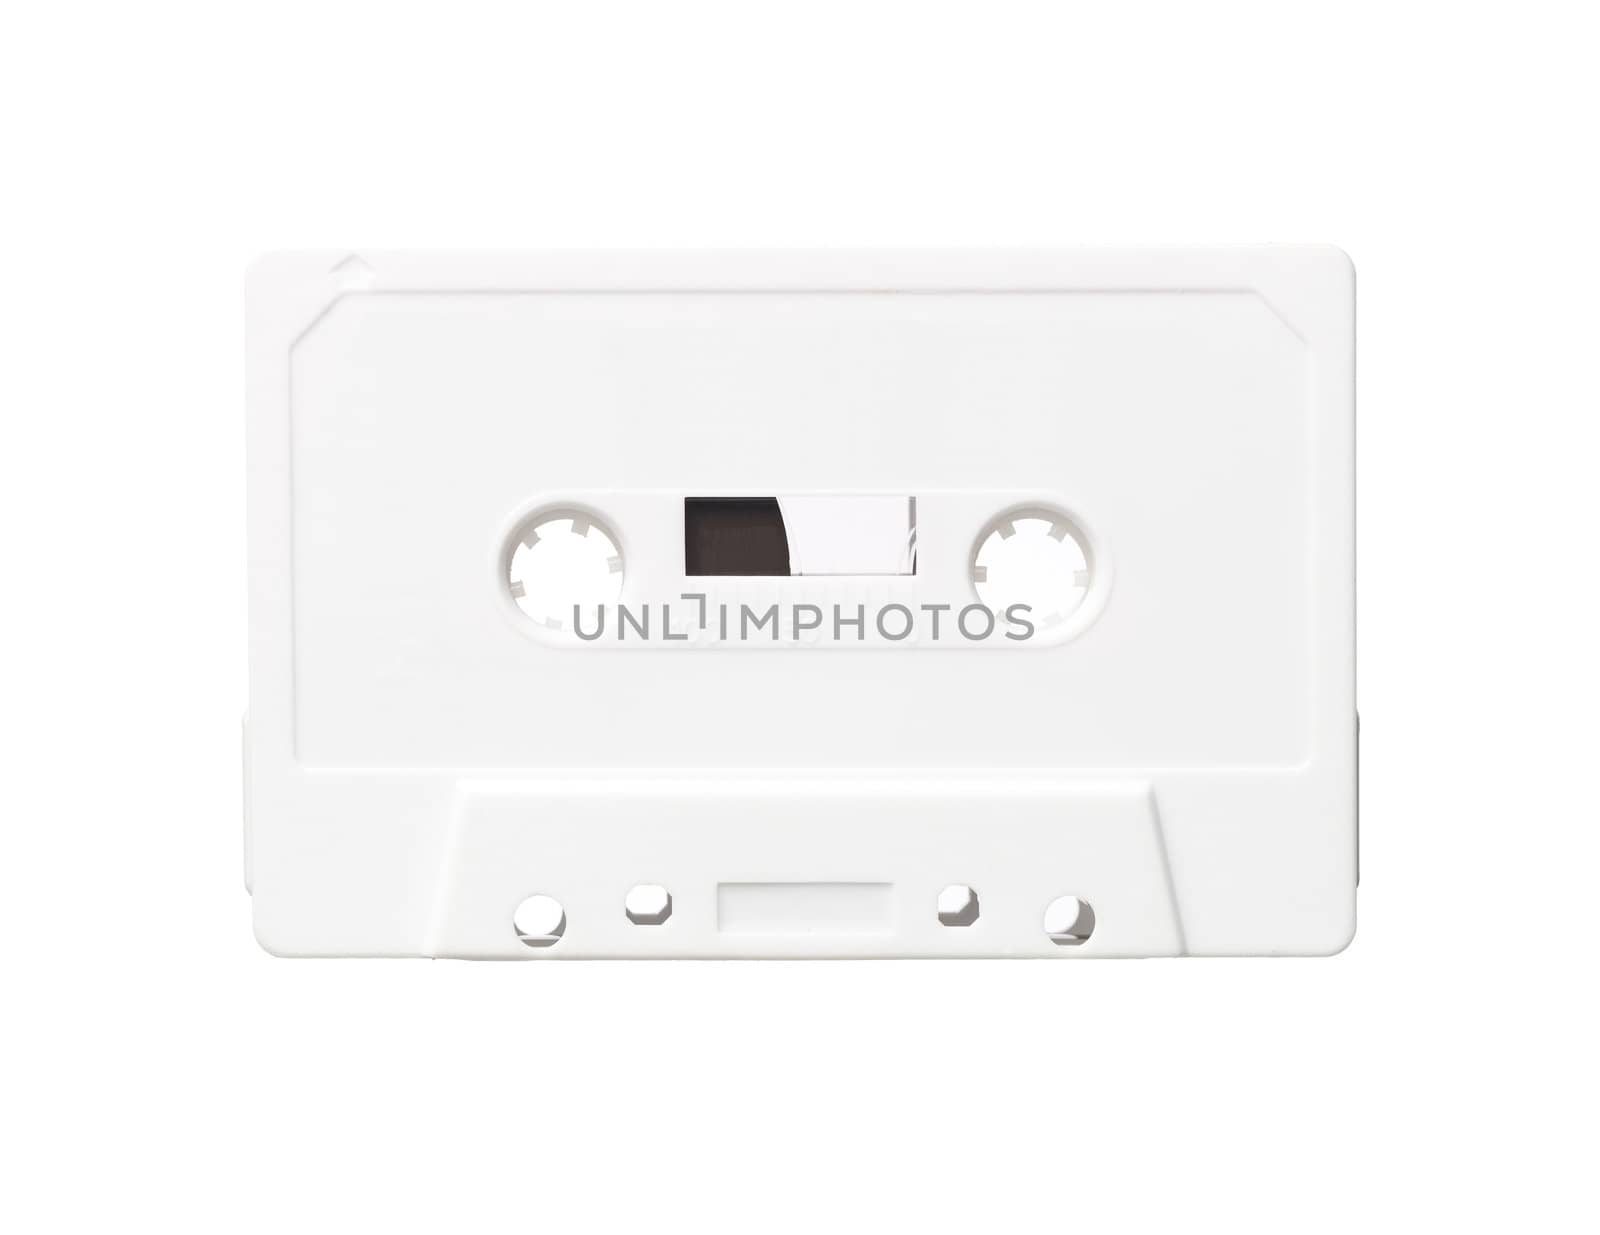 White audio cassette isolated on a white background